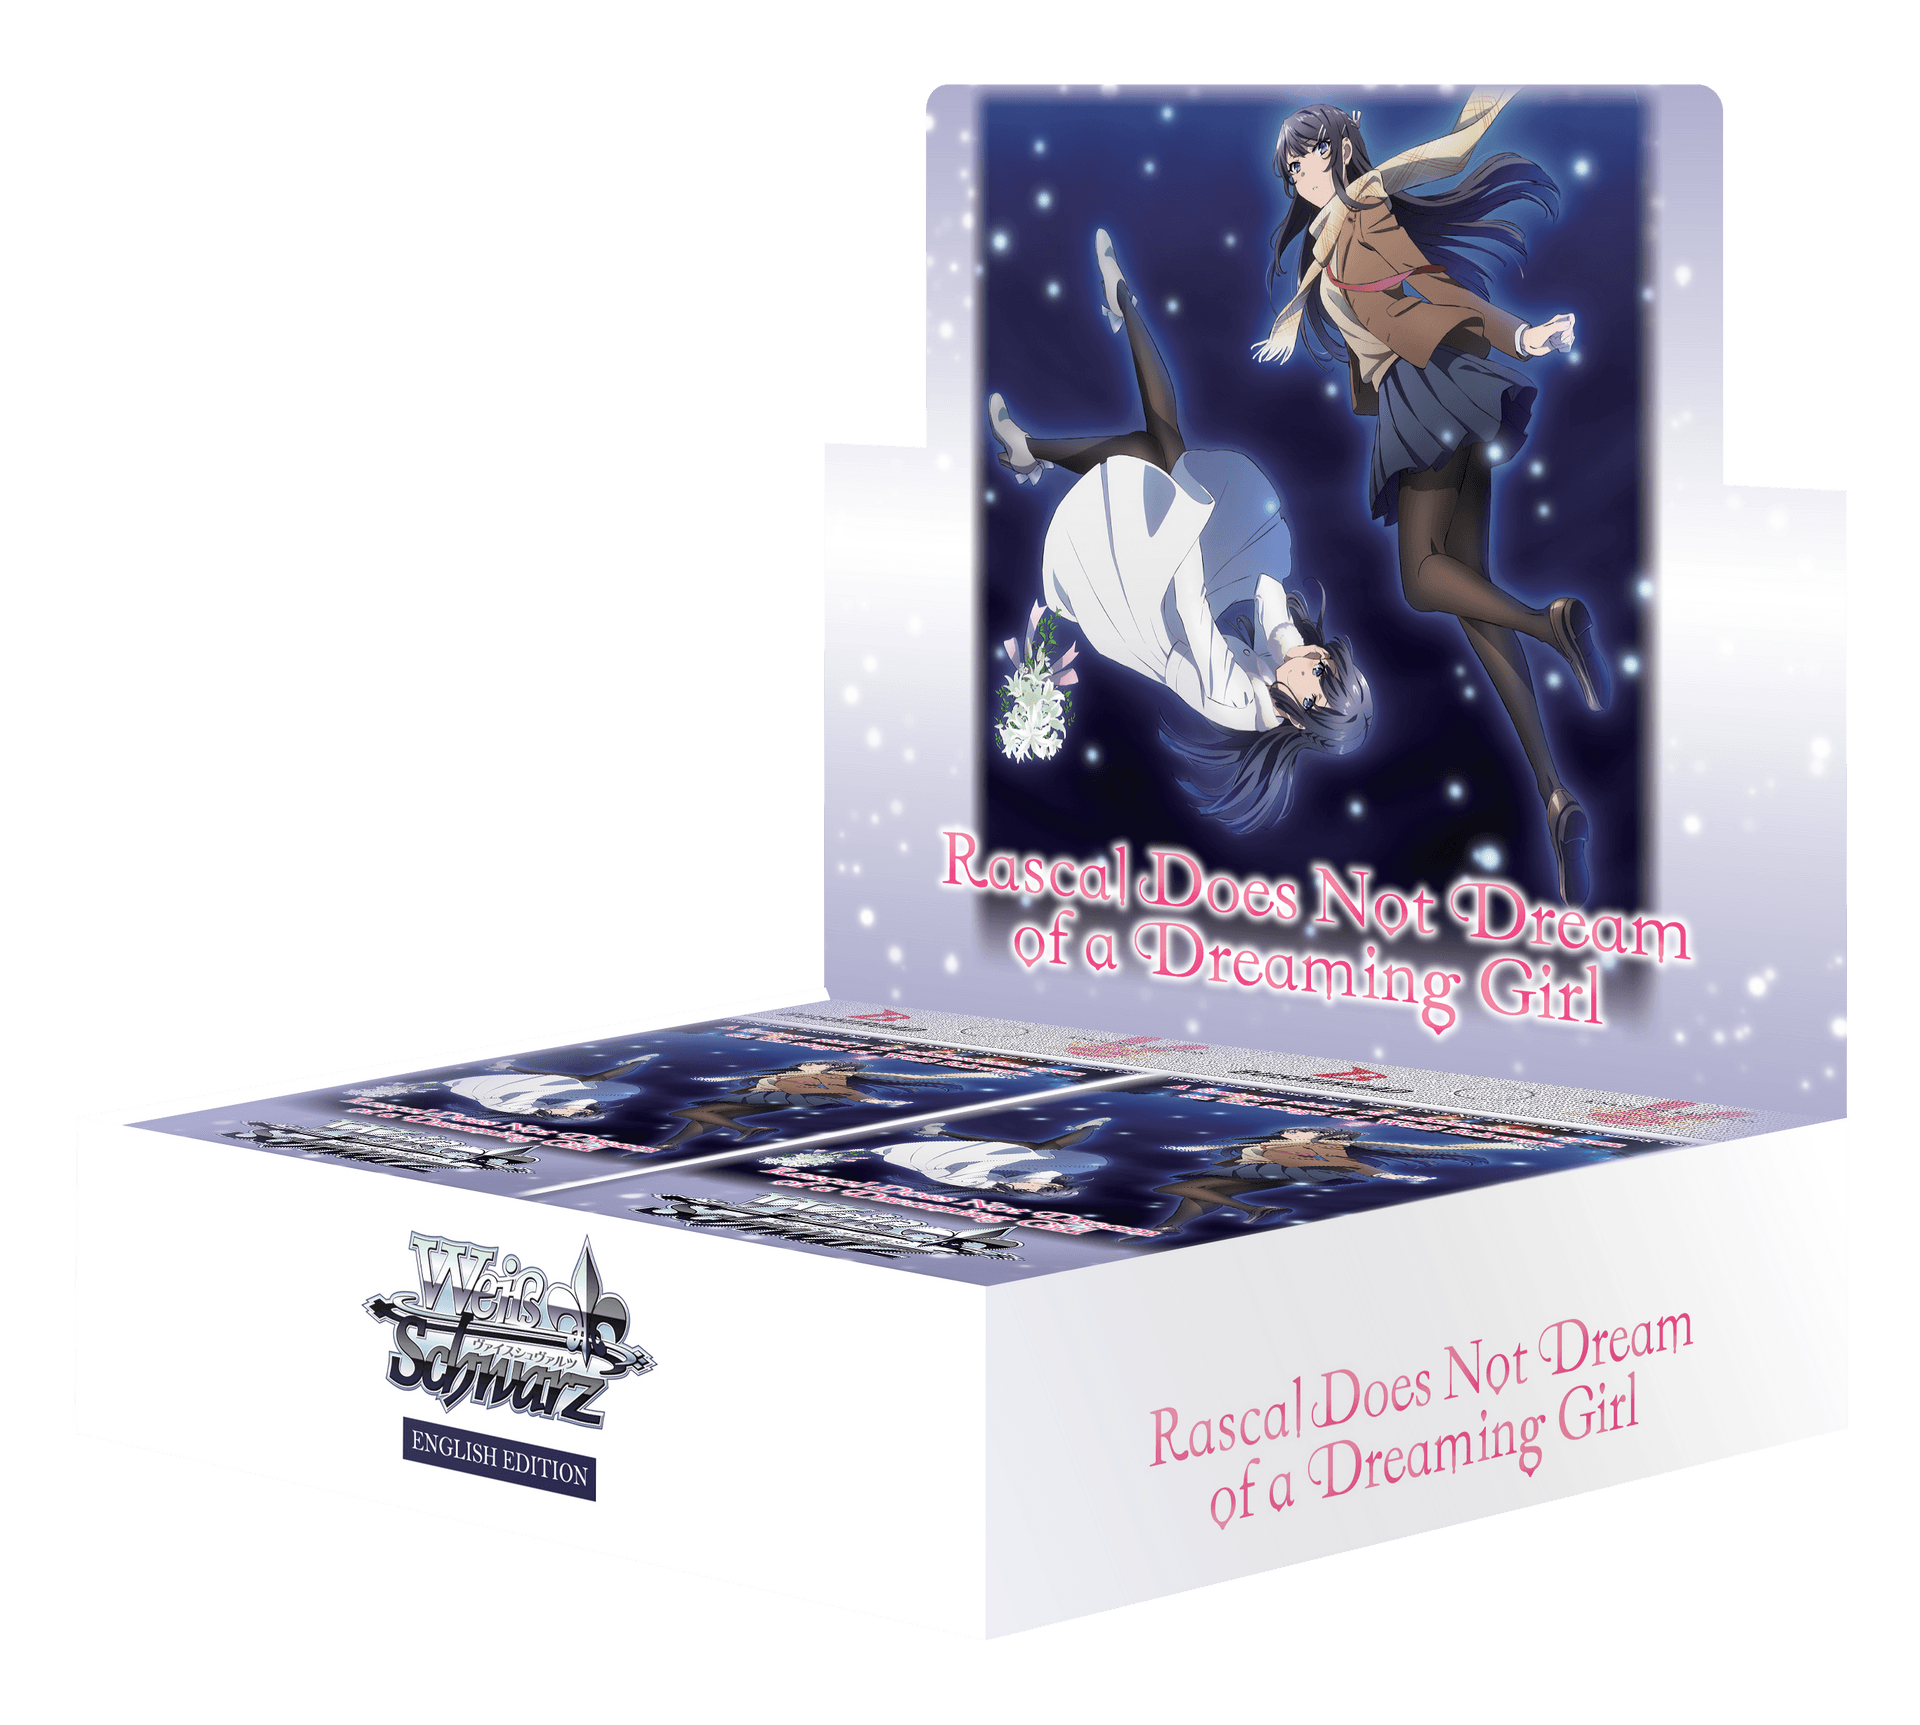 Weiss Schwarz - Rascal Does Not Dream of a Dreaming Girl Booster Box